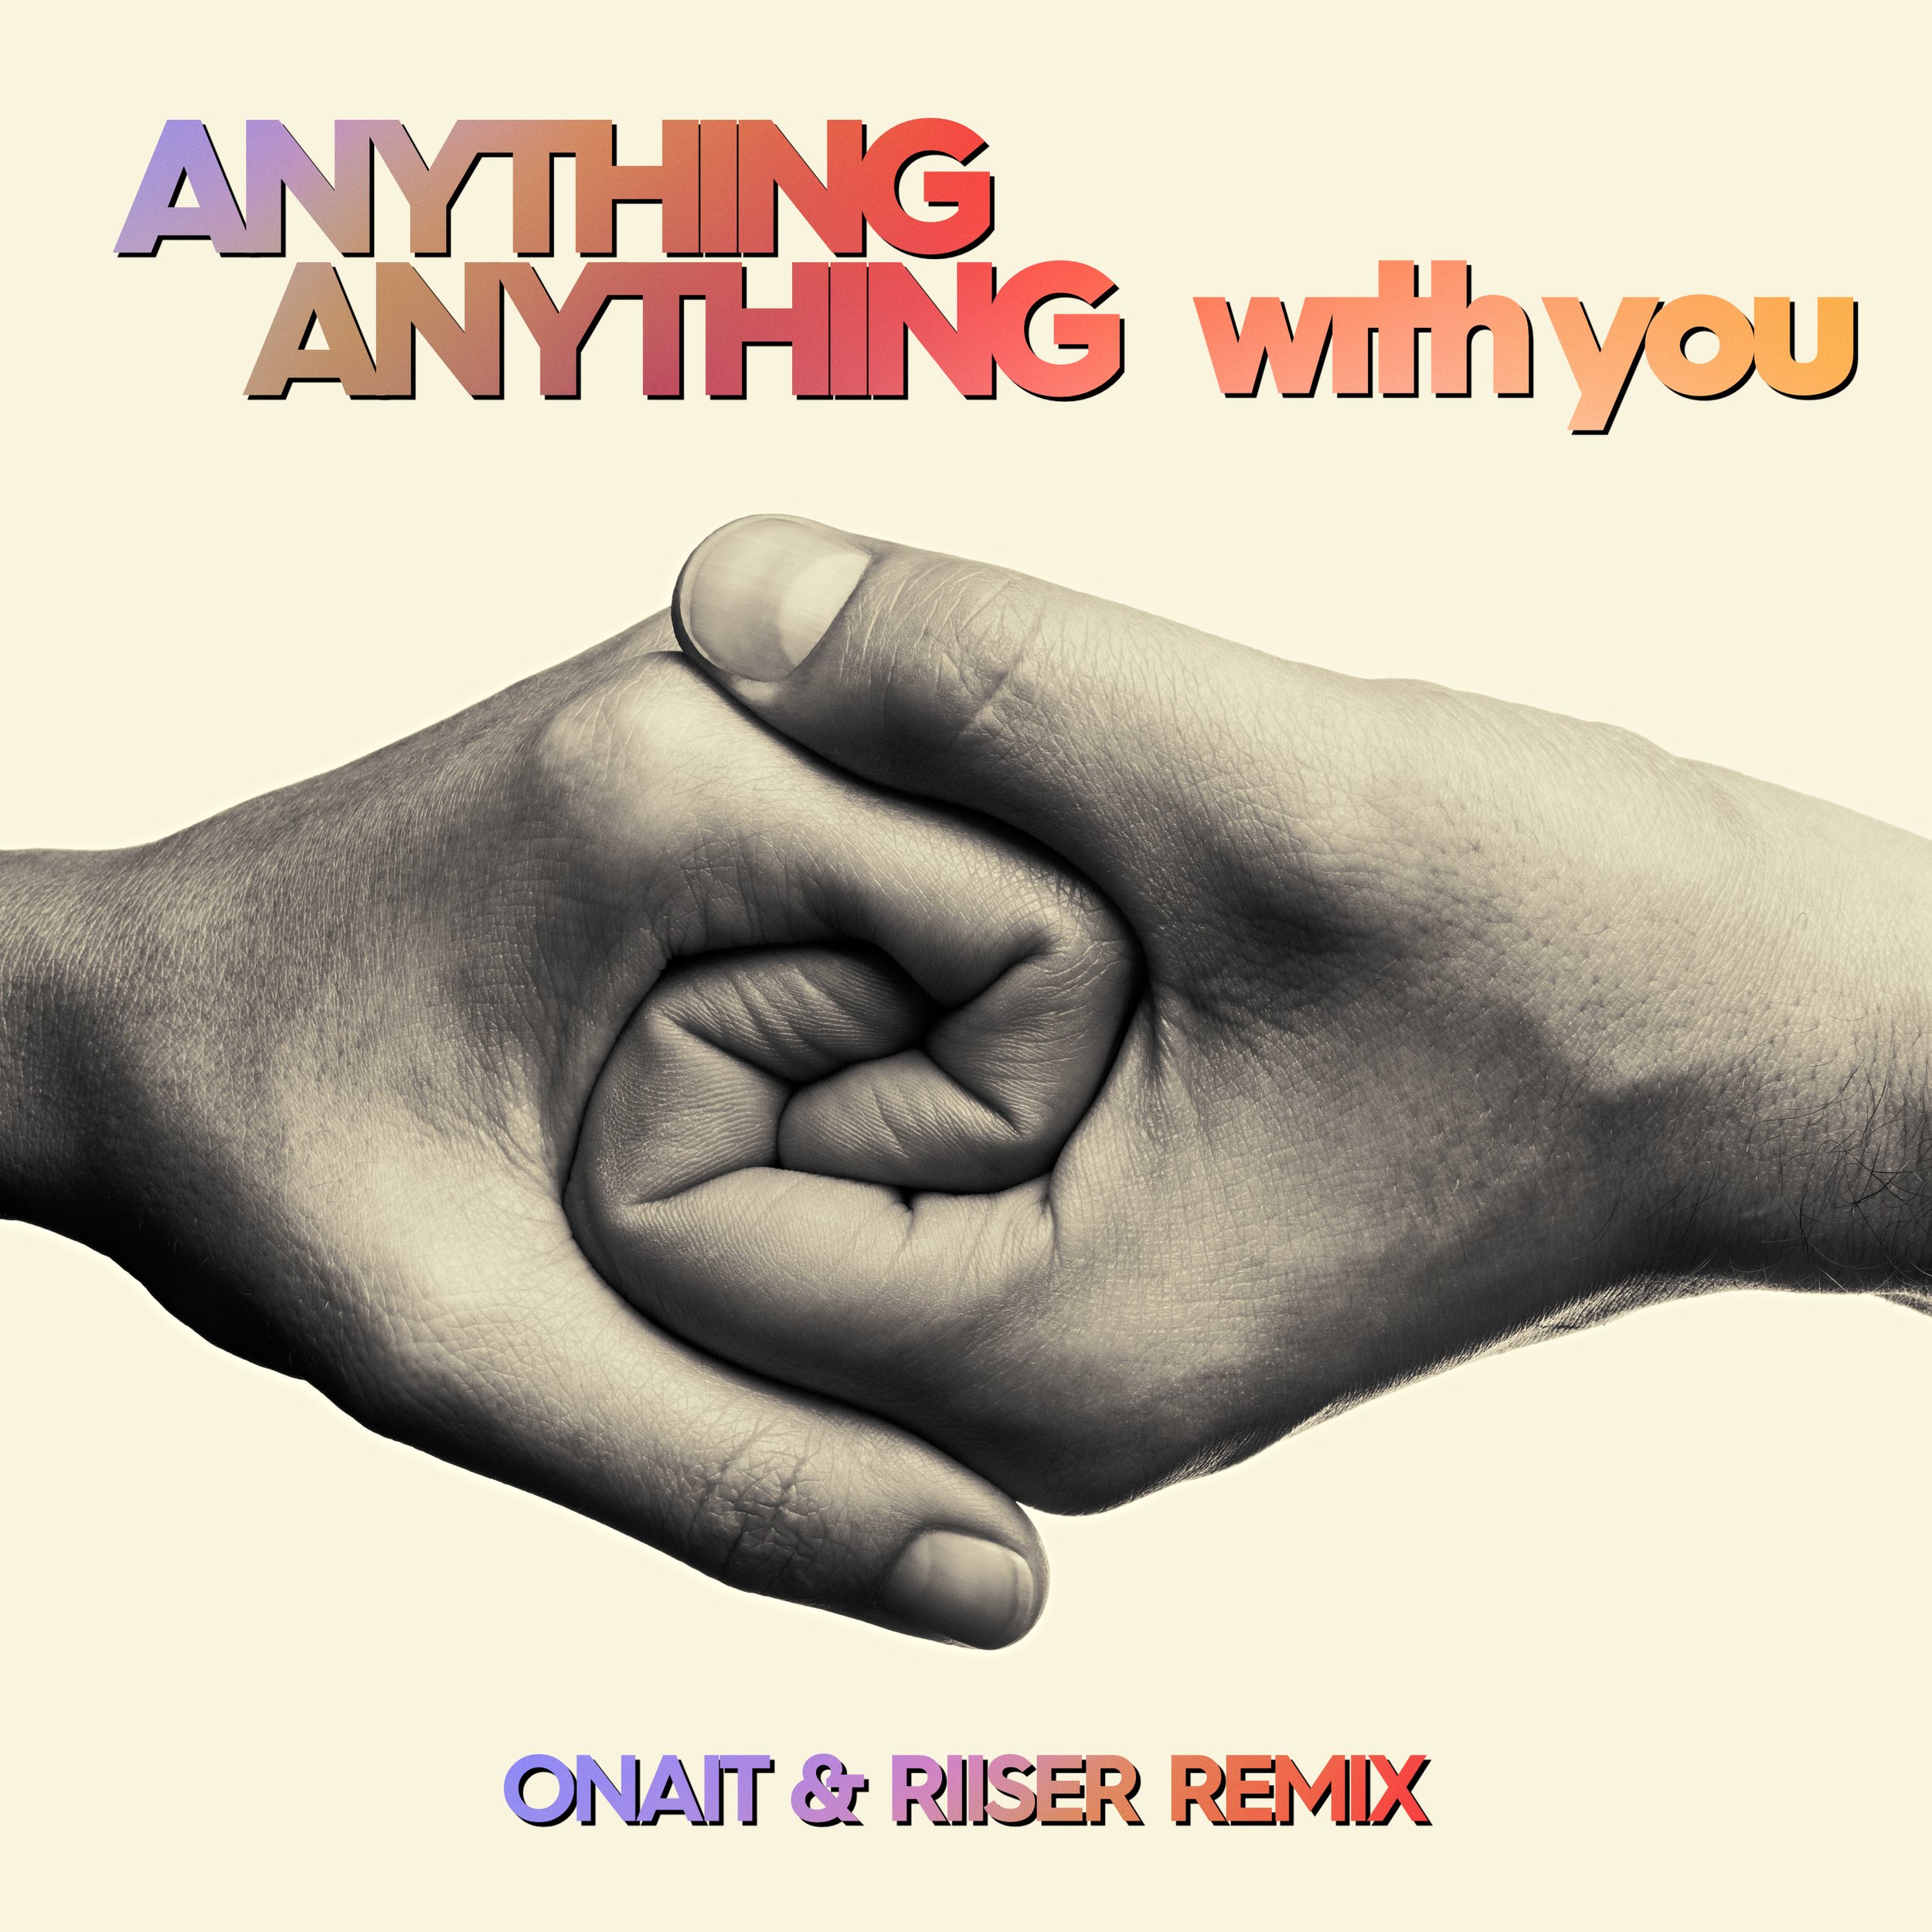 Anything Anything - With You (ONait & Riiser Remix) - Artwork.jpg